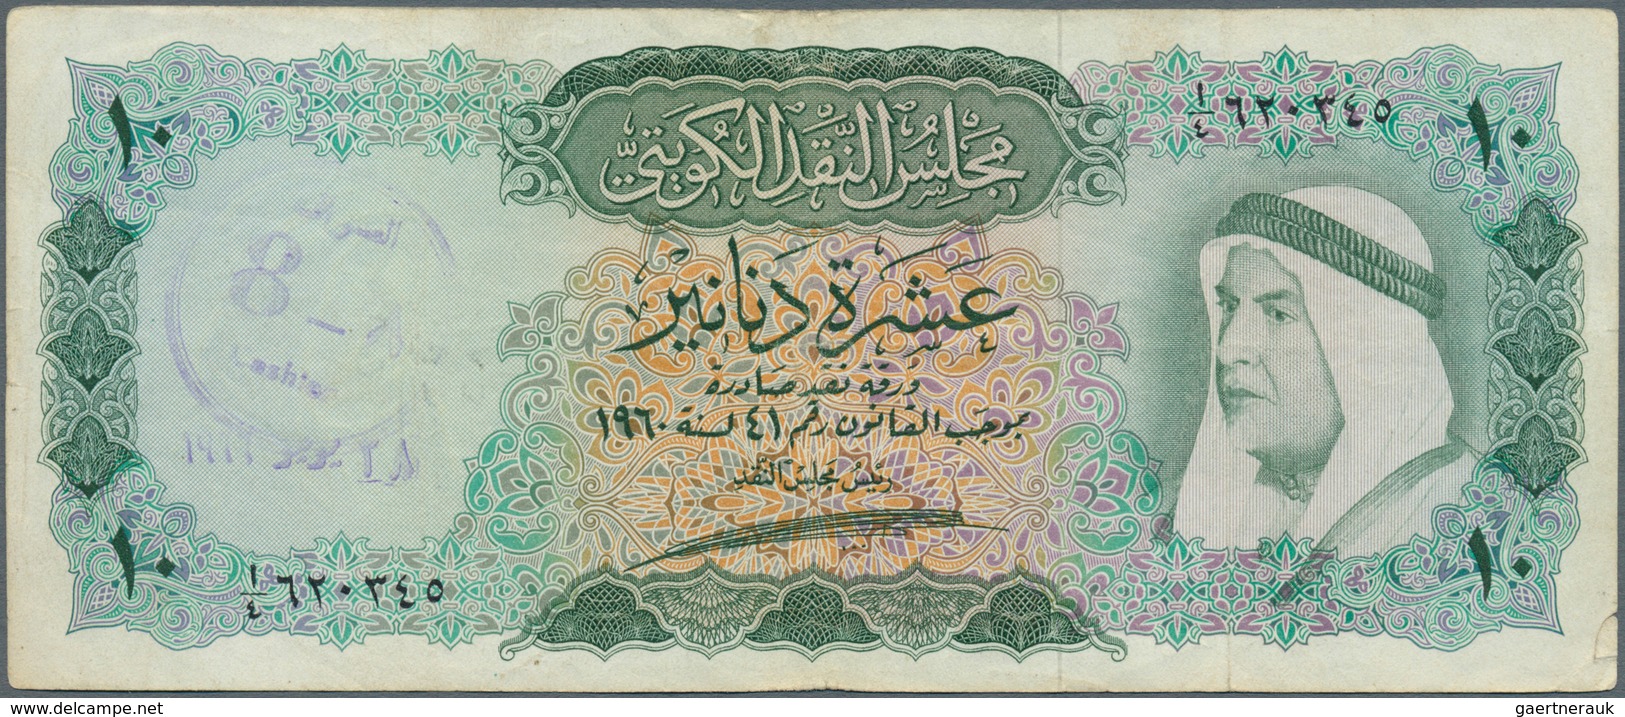 01918 Kuwait: 10 Dinard ND P. 5, Used With Vertical Folds And Bank Stamp In Watermark Area, No Holes, One - Kuwait